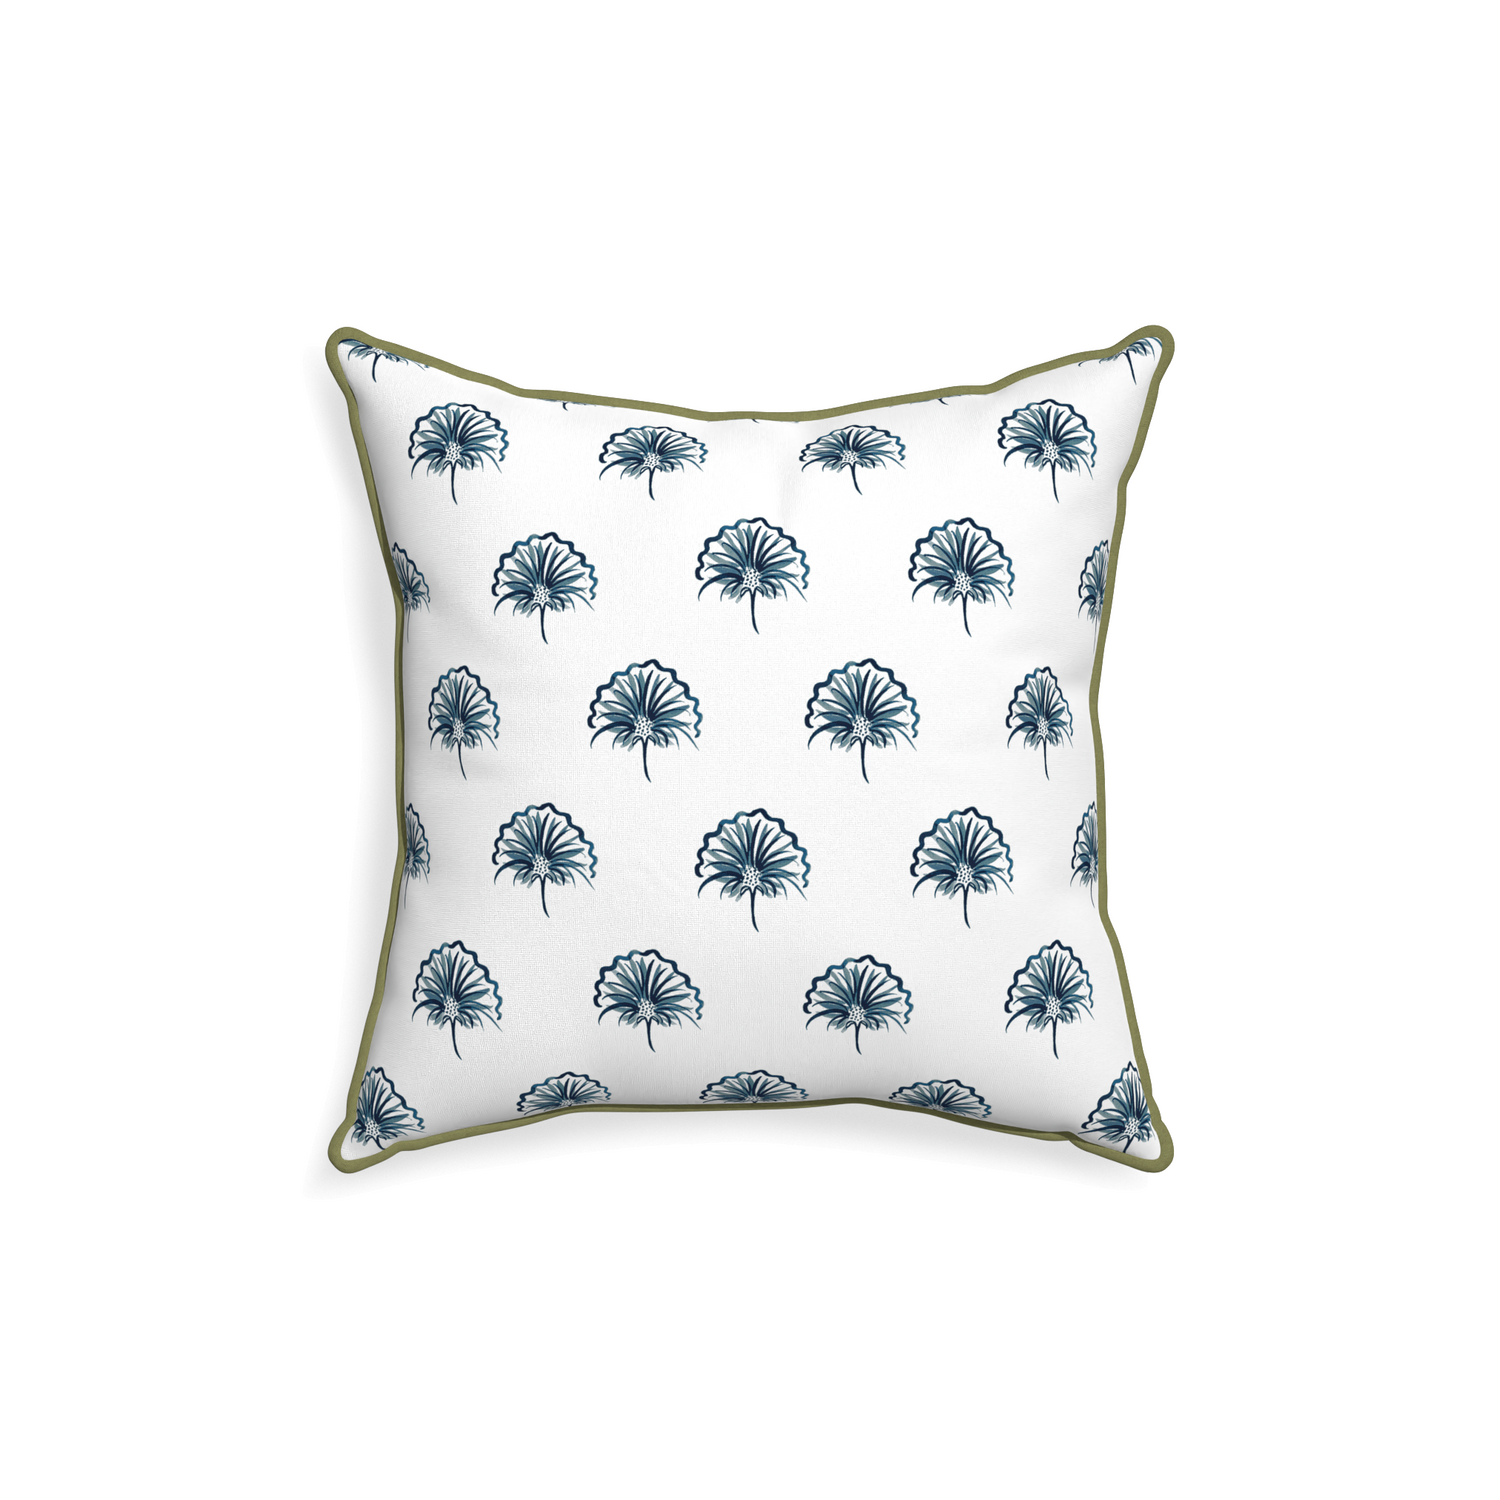 18-square penelope midnight custom floral navypillow with moss piping on white background